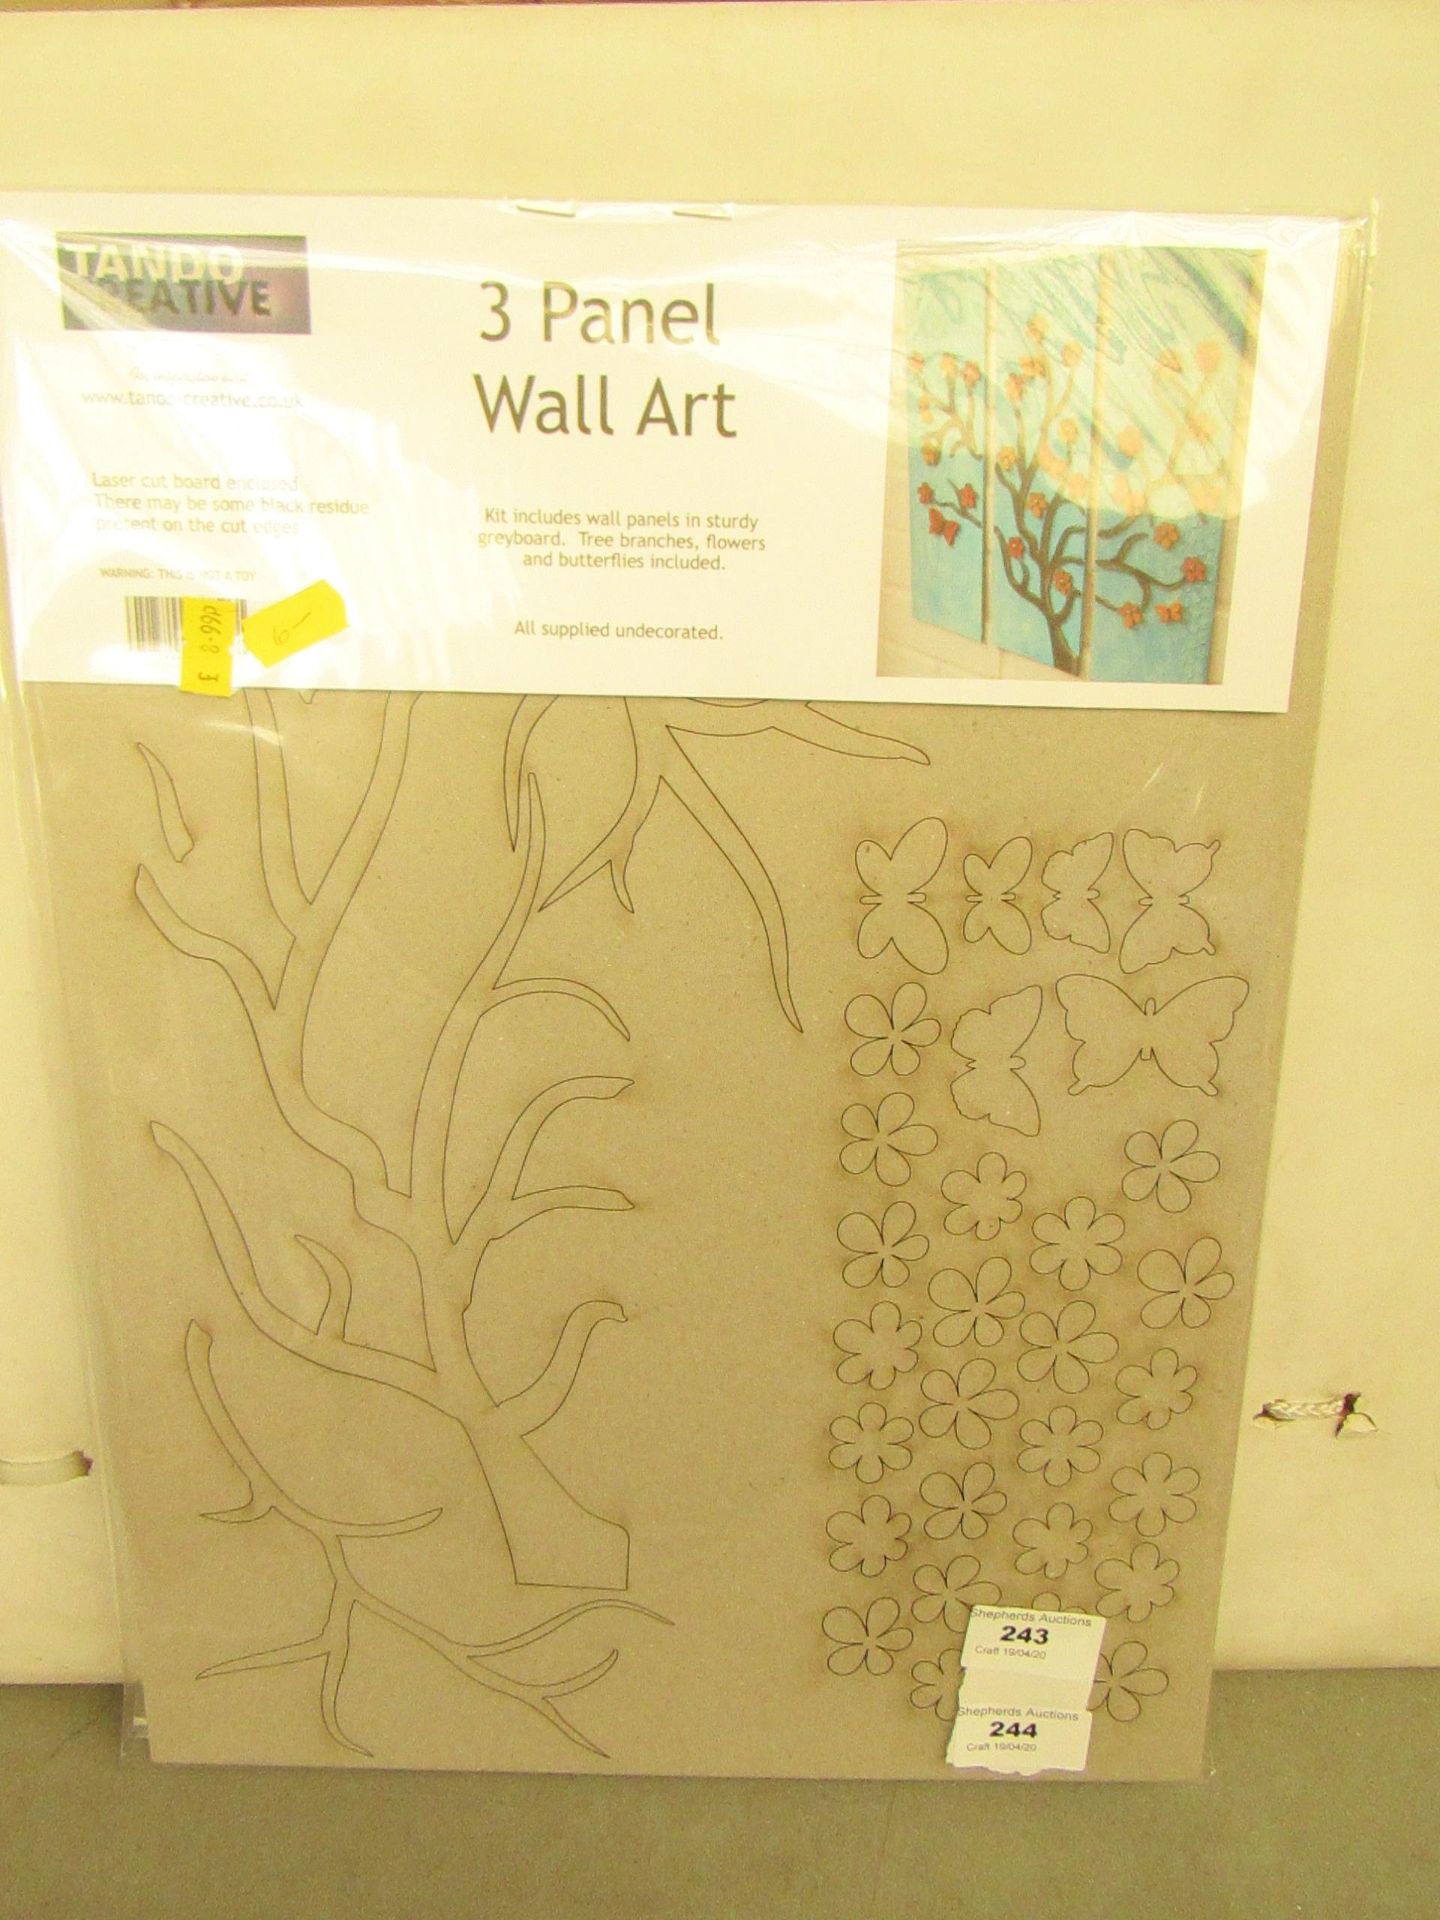 Tando Creative 3 Panel Wall Art Kit inc Panels, Tree Branches, Flowers & Butterfies new